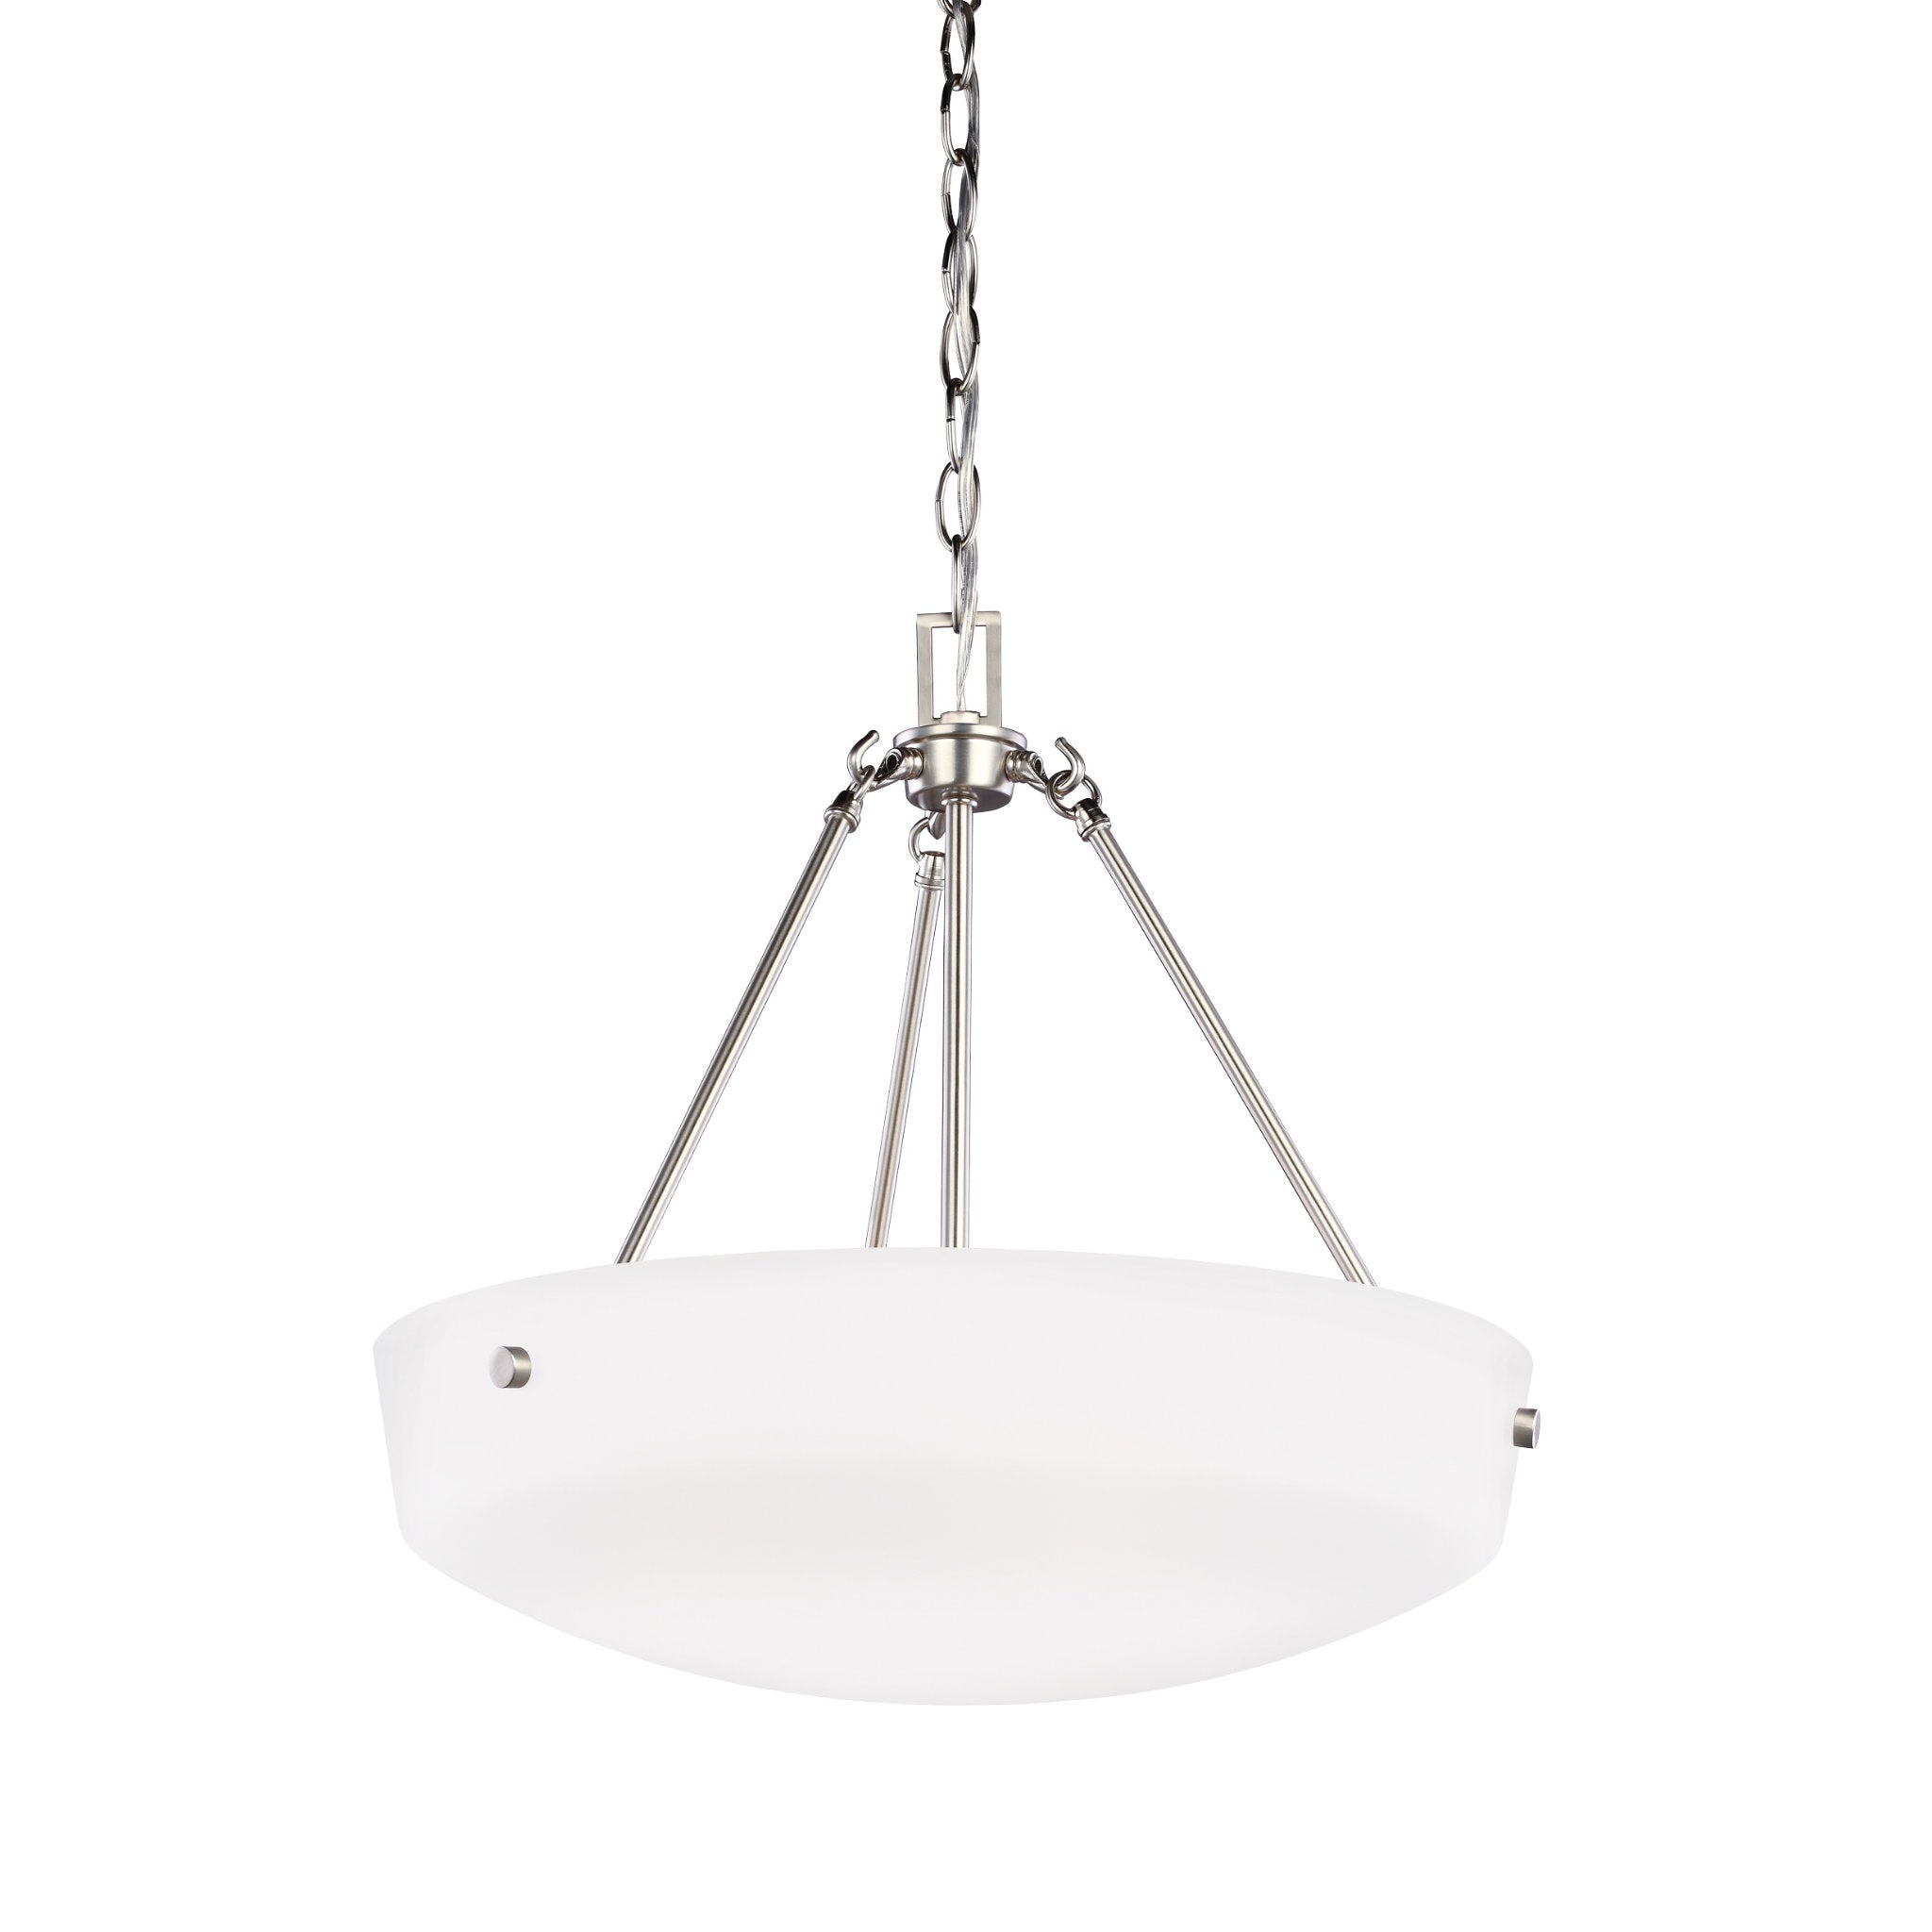 Kerrville Three Light Pendant Transitional 18.375" Height Steel Round Satin Etched Shade in Brushed Nickel